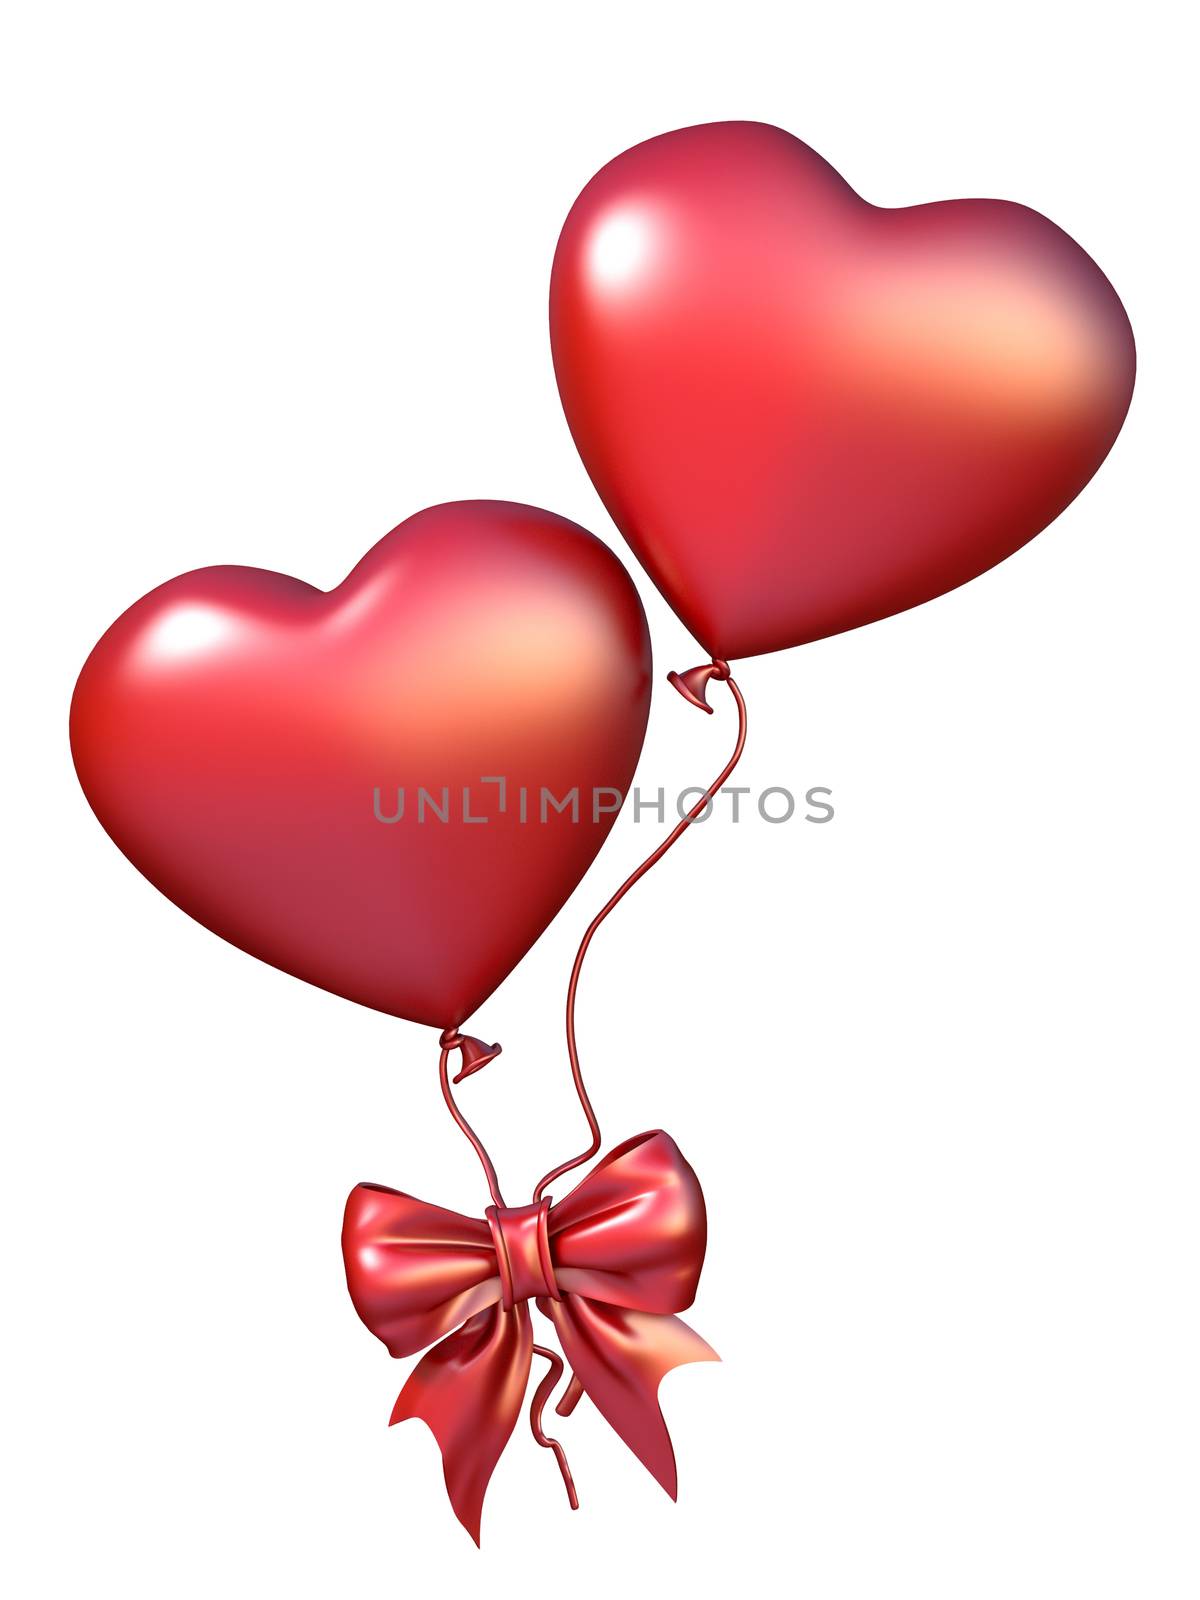 Two red heart shaped balloons with ribbon bow 3D render illustration isolated on white background